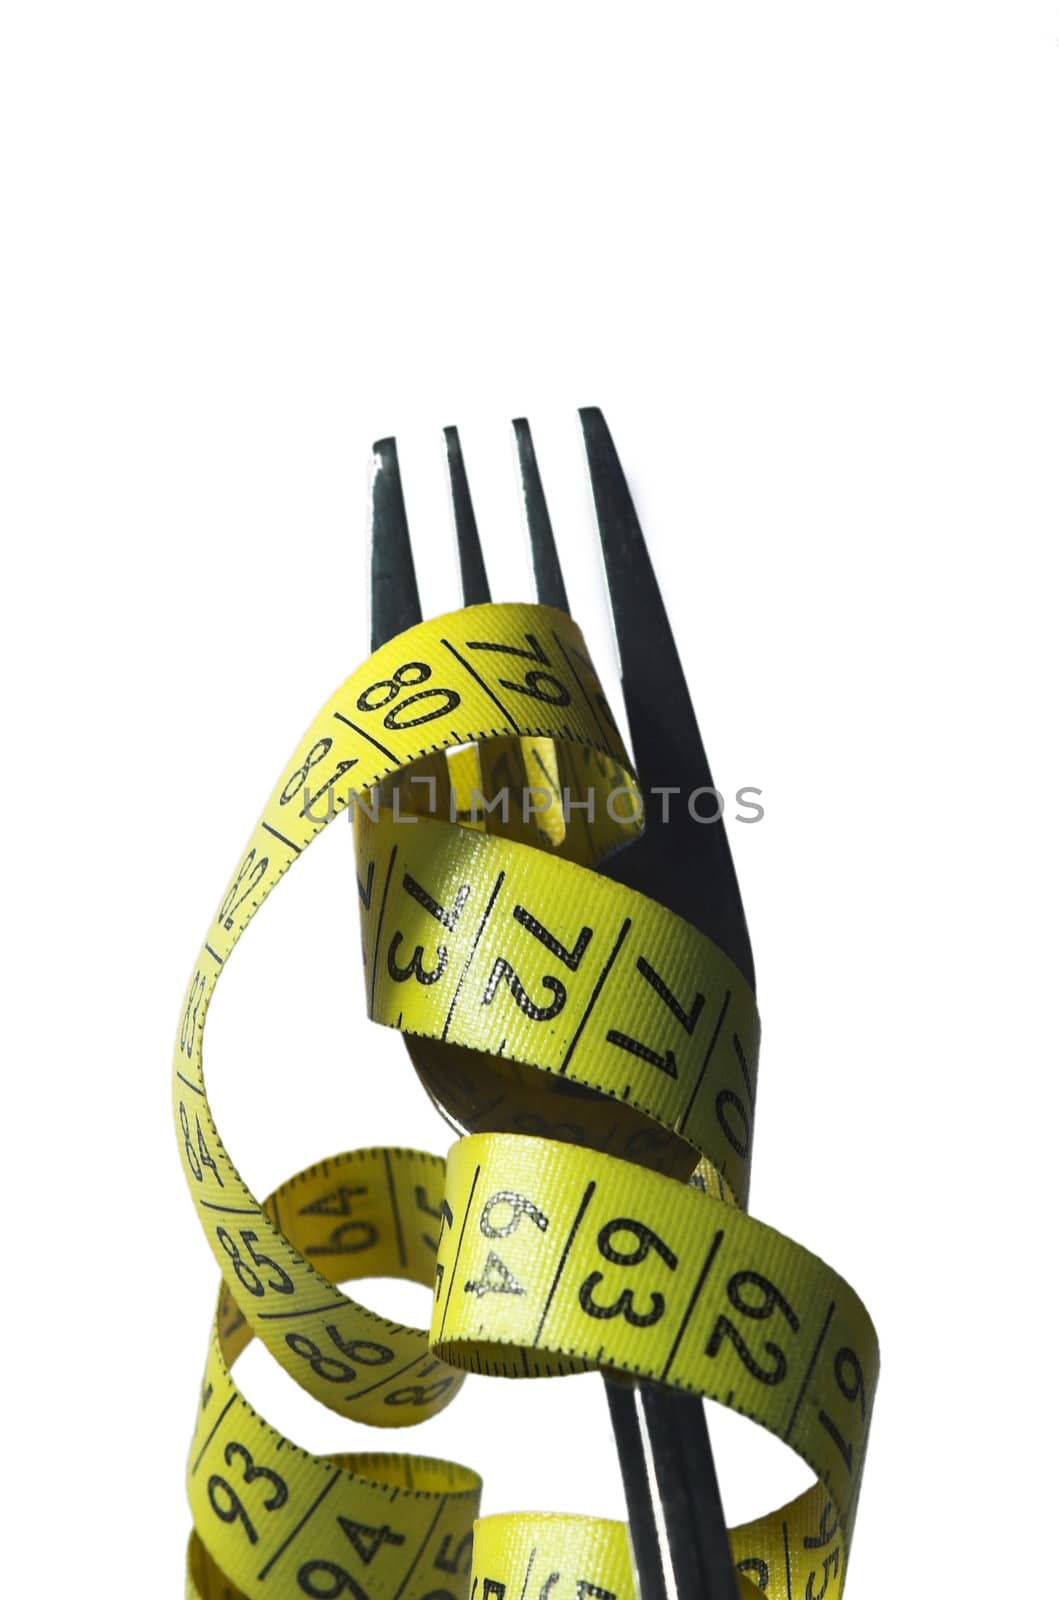 centimeter, centimetre, crutch, cutlery, diet, , eat, fall, fork, loose, measure,  weight, yellow, 